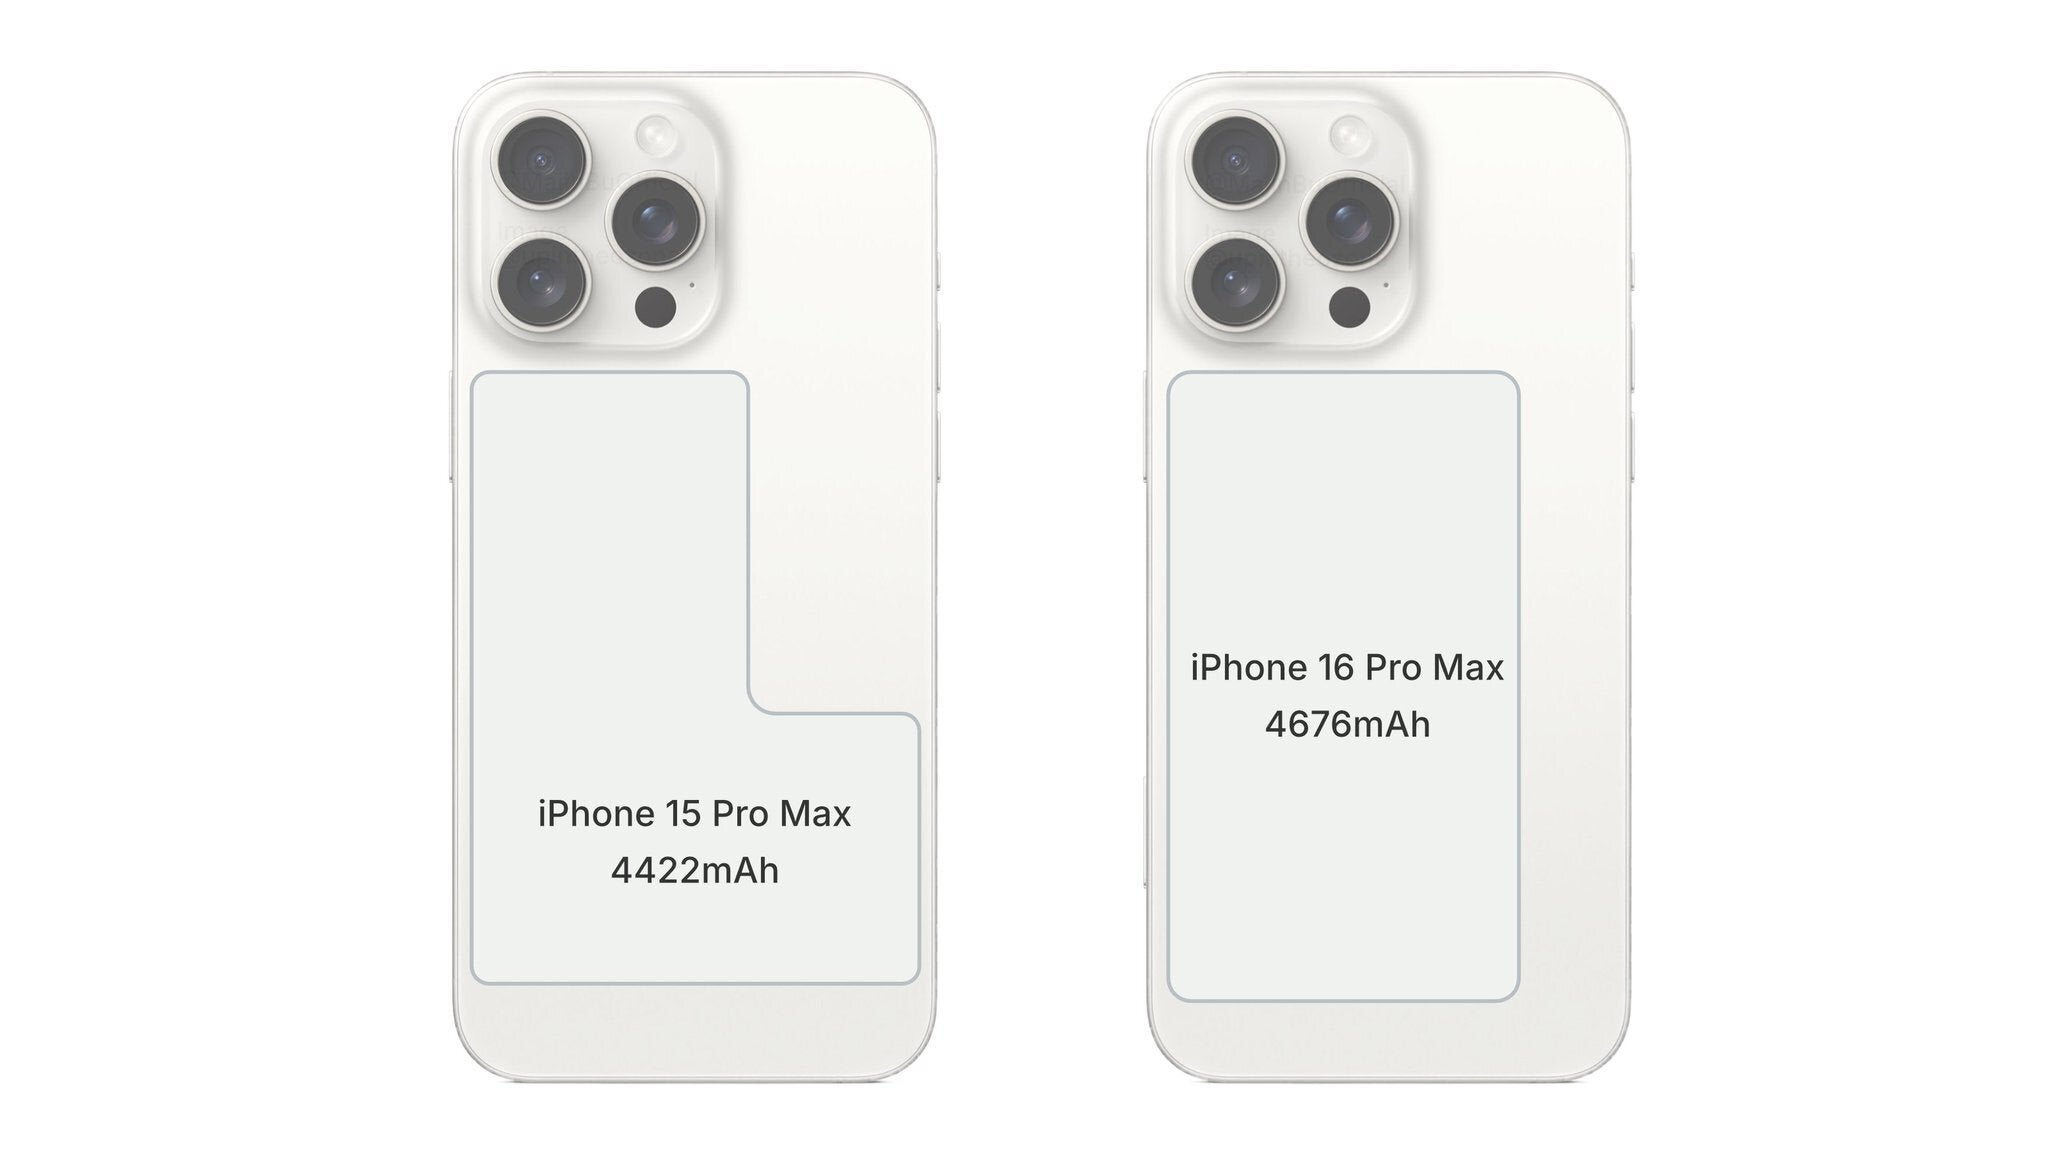 Latest iPhone 15 vs iPhone 16 comparison shows difference in battery capacities